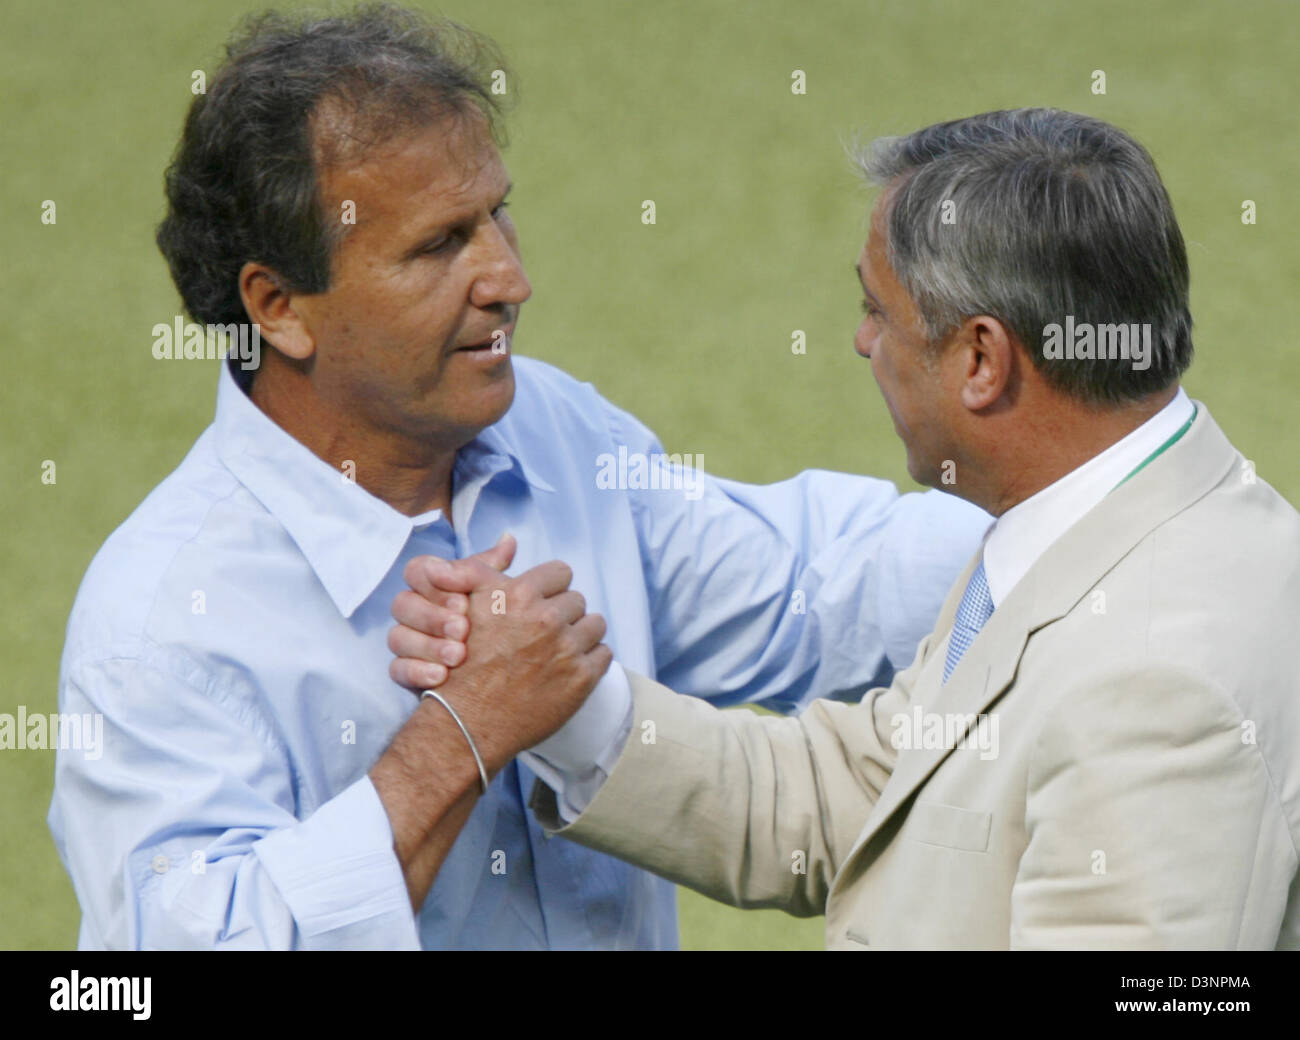 Japan's Brasilian coach Zico (L) and his Croatian colleague Zlatko Kranjcar (R) shake hands after the group F preliminary match of the 2006 FIFA World Cup between Japan and Croatia in Nuremberg, Germany, Sunday, 18 June 2006. The match ended in a 0-0 draw. Photo: Ronald Wittek +++ Mobile Services OUT +++ Please also refer to FIFA's Terms and Conditions. Stock Photo